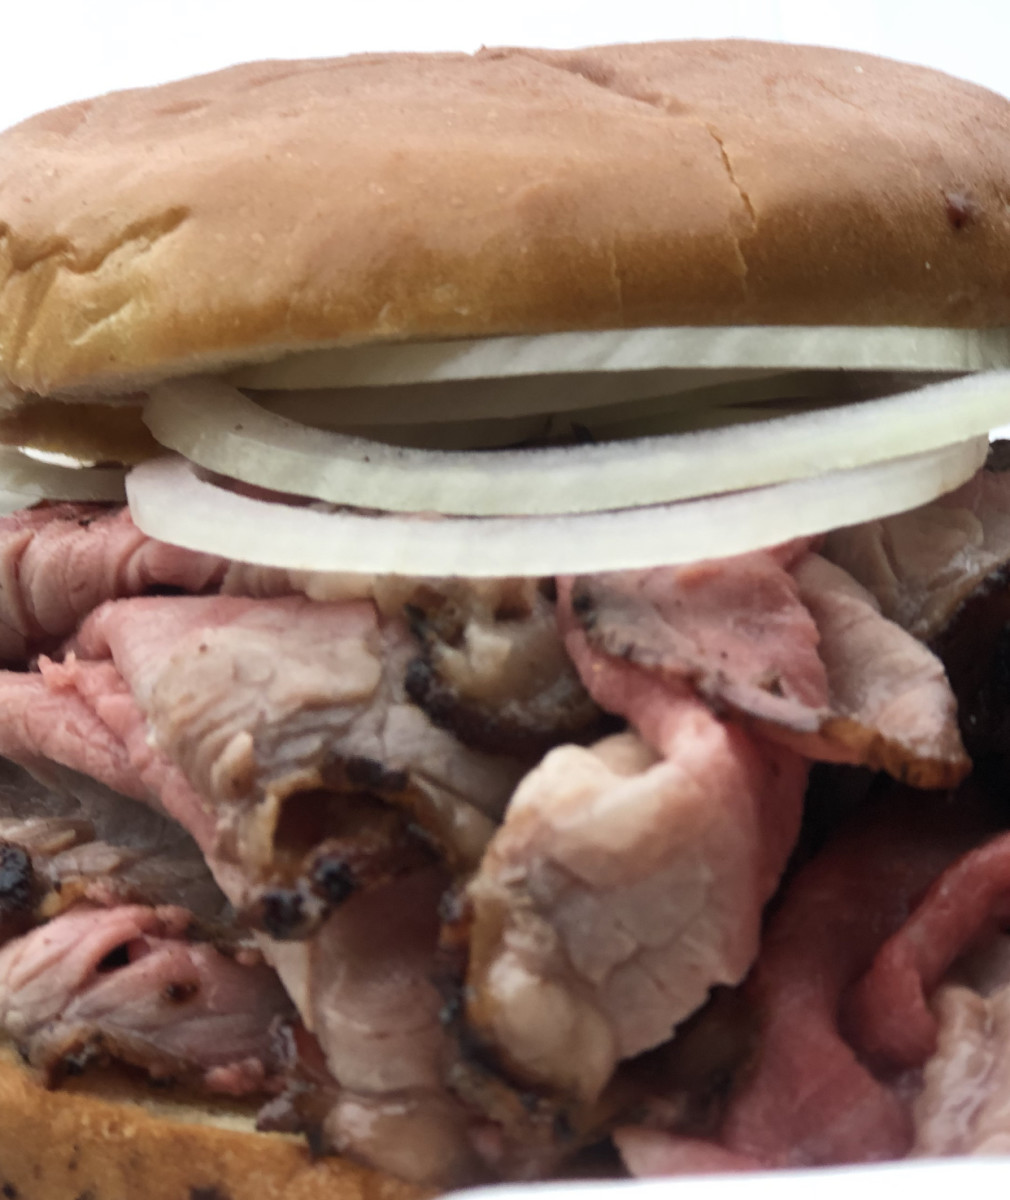 The pit beef sandwich is served medium rare, sliced thin, and piled high on a round bun, often garnished with raw onions.  